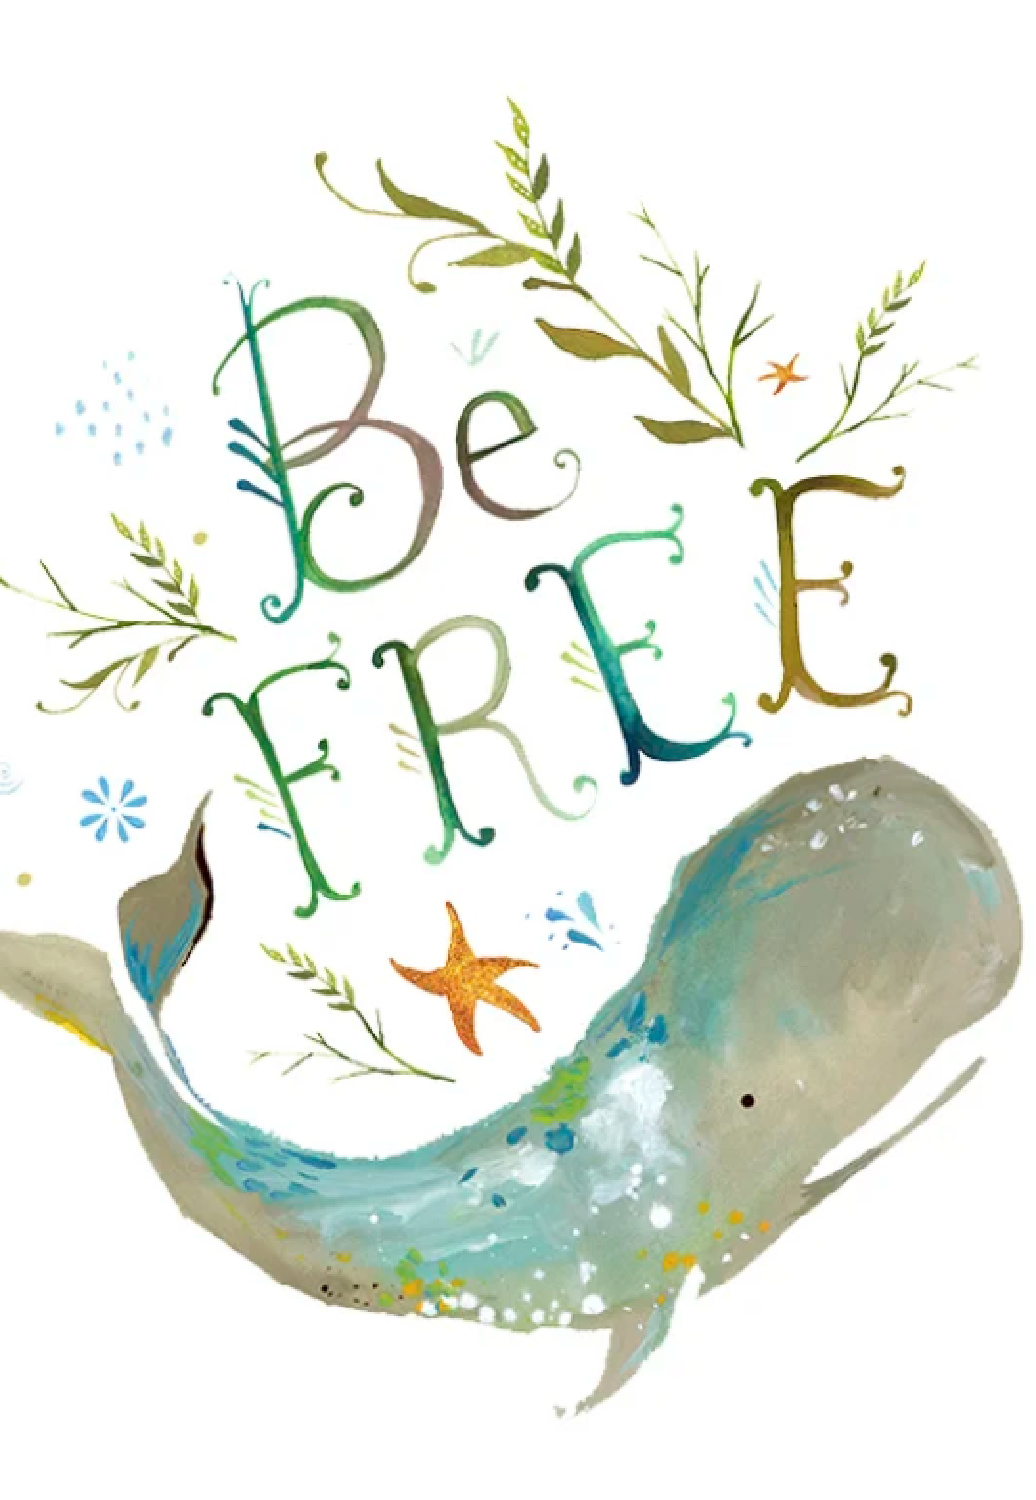 Be Free handlettered art pritn by Katie Daisy. #handlettered #whaleart